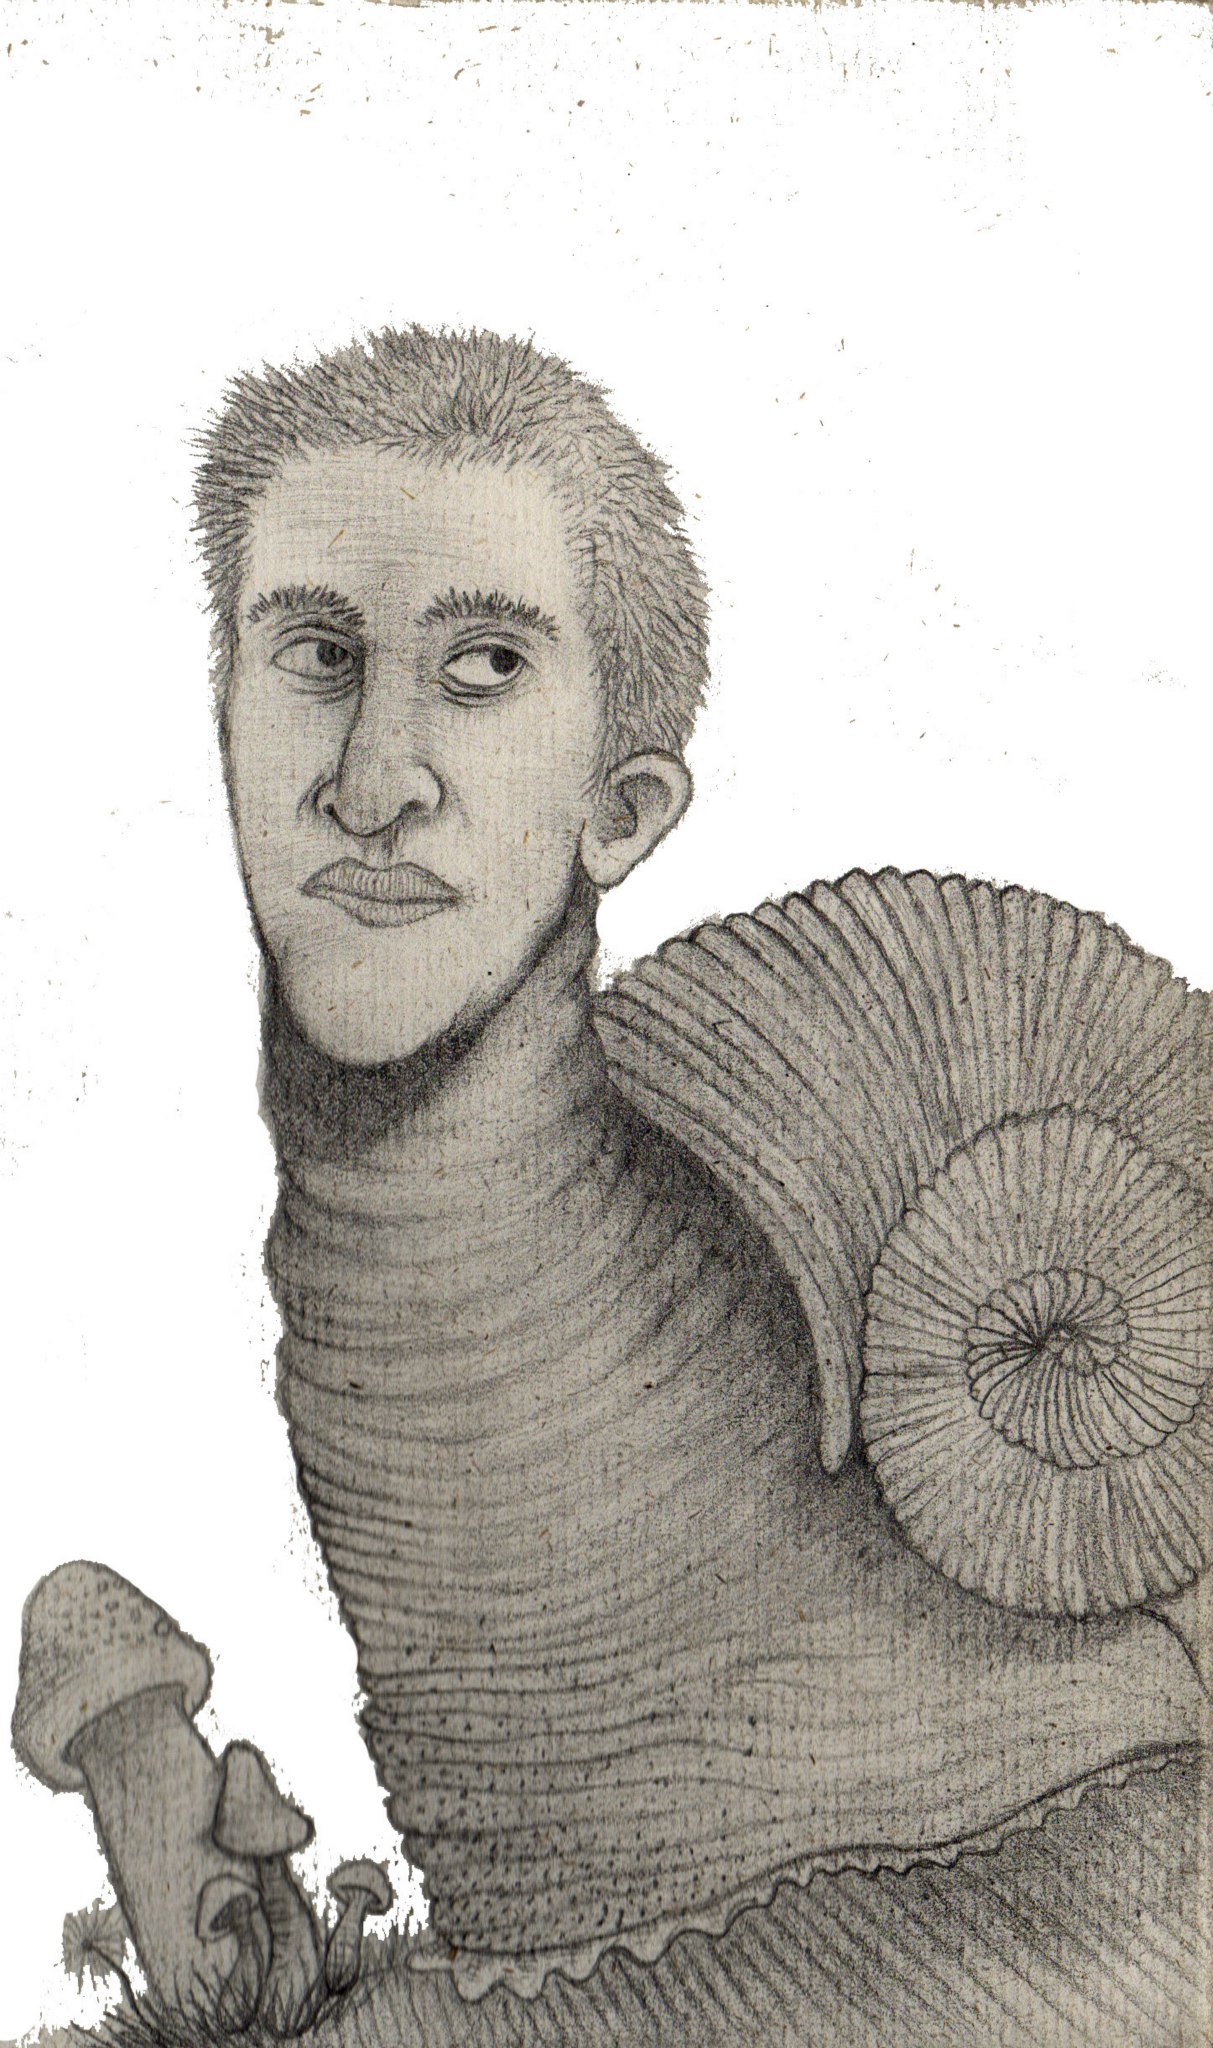 A pencil drawing of a snail with a man's head, short hair, and a slightly peeved expression. To the side is a clump of mushrooms.